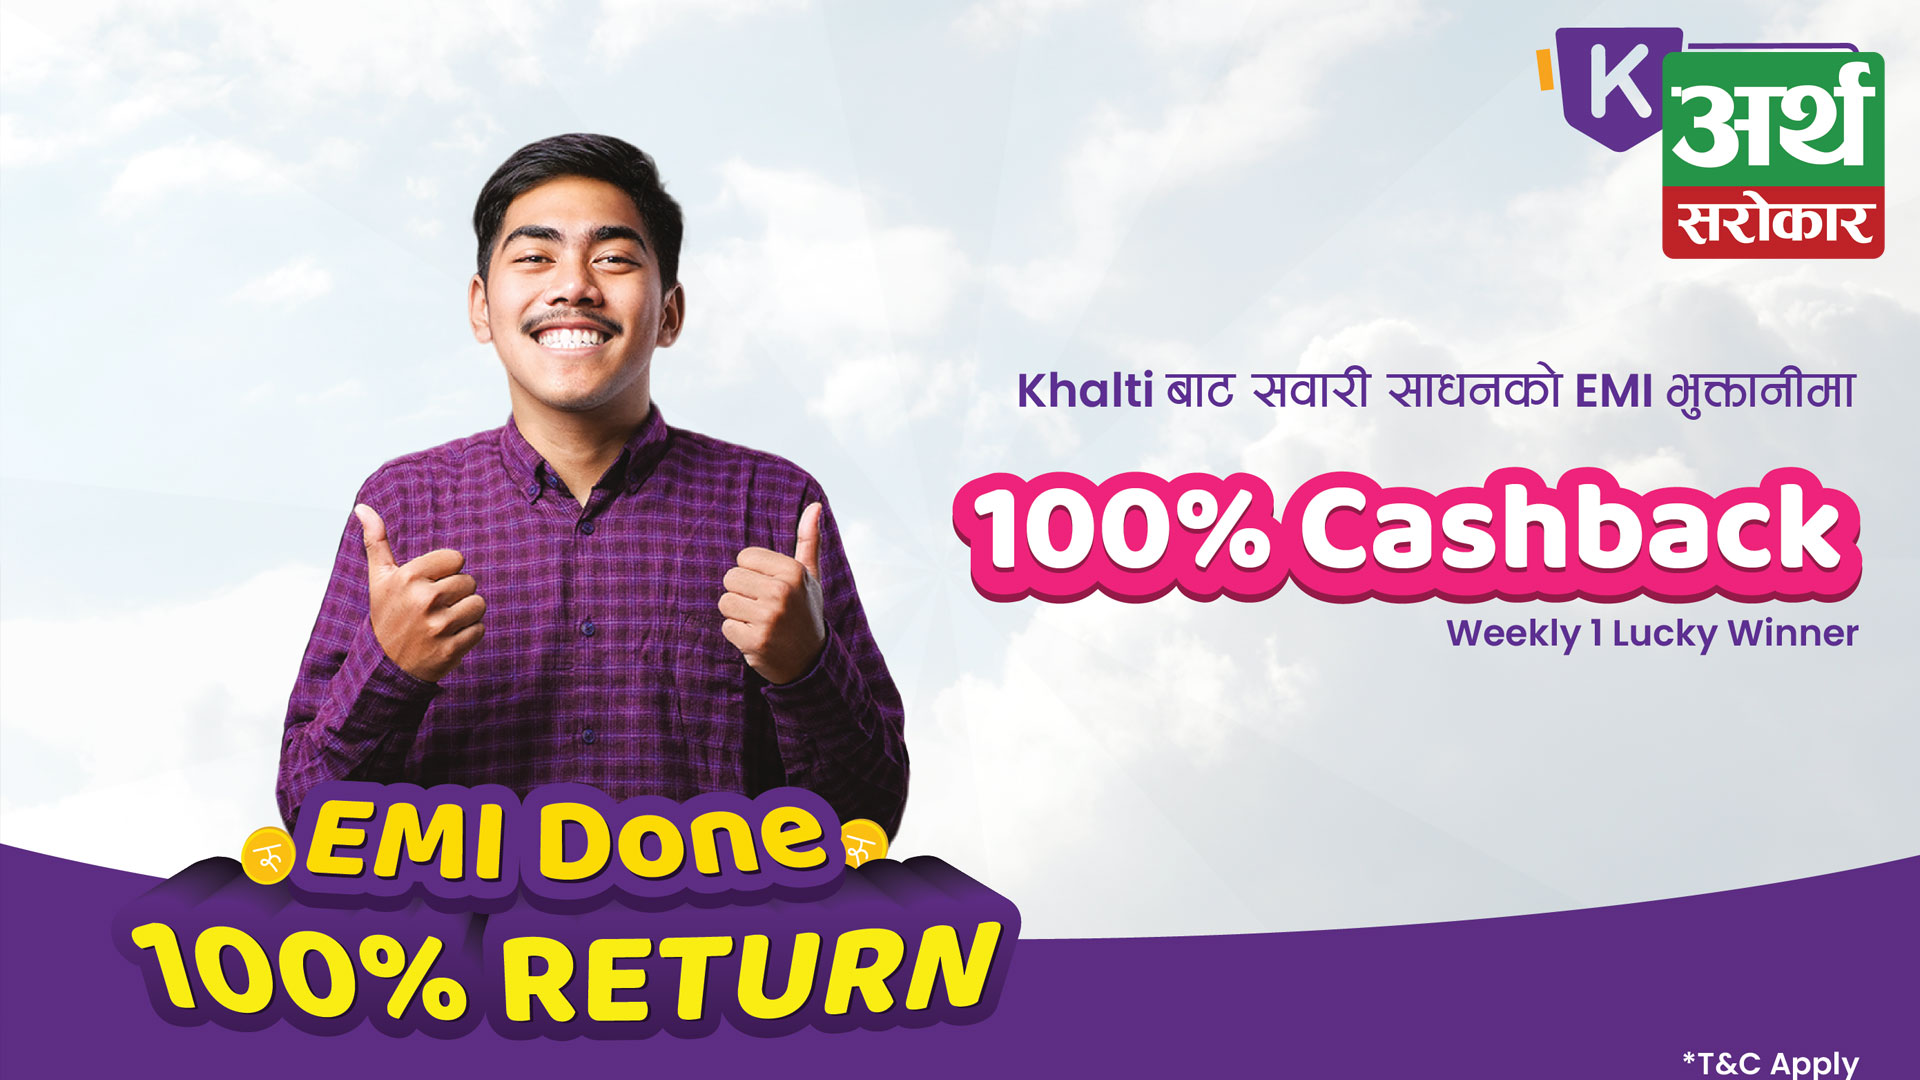 Chance to win 100% cashback on EMI payment from Khalti